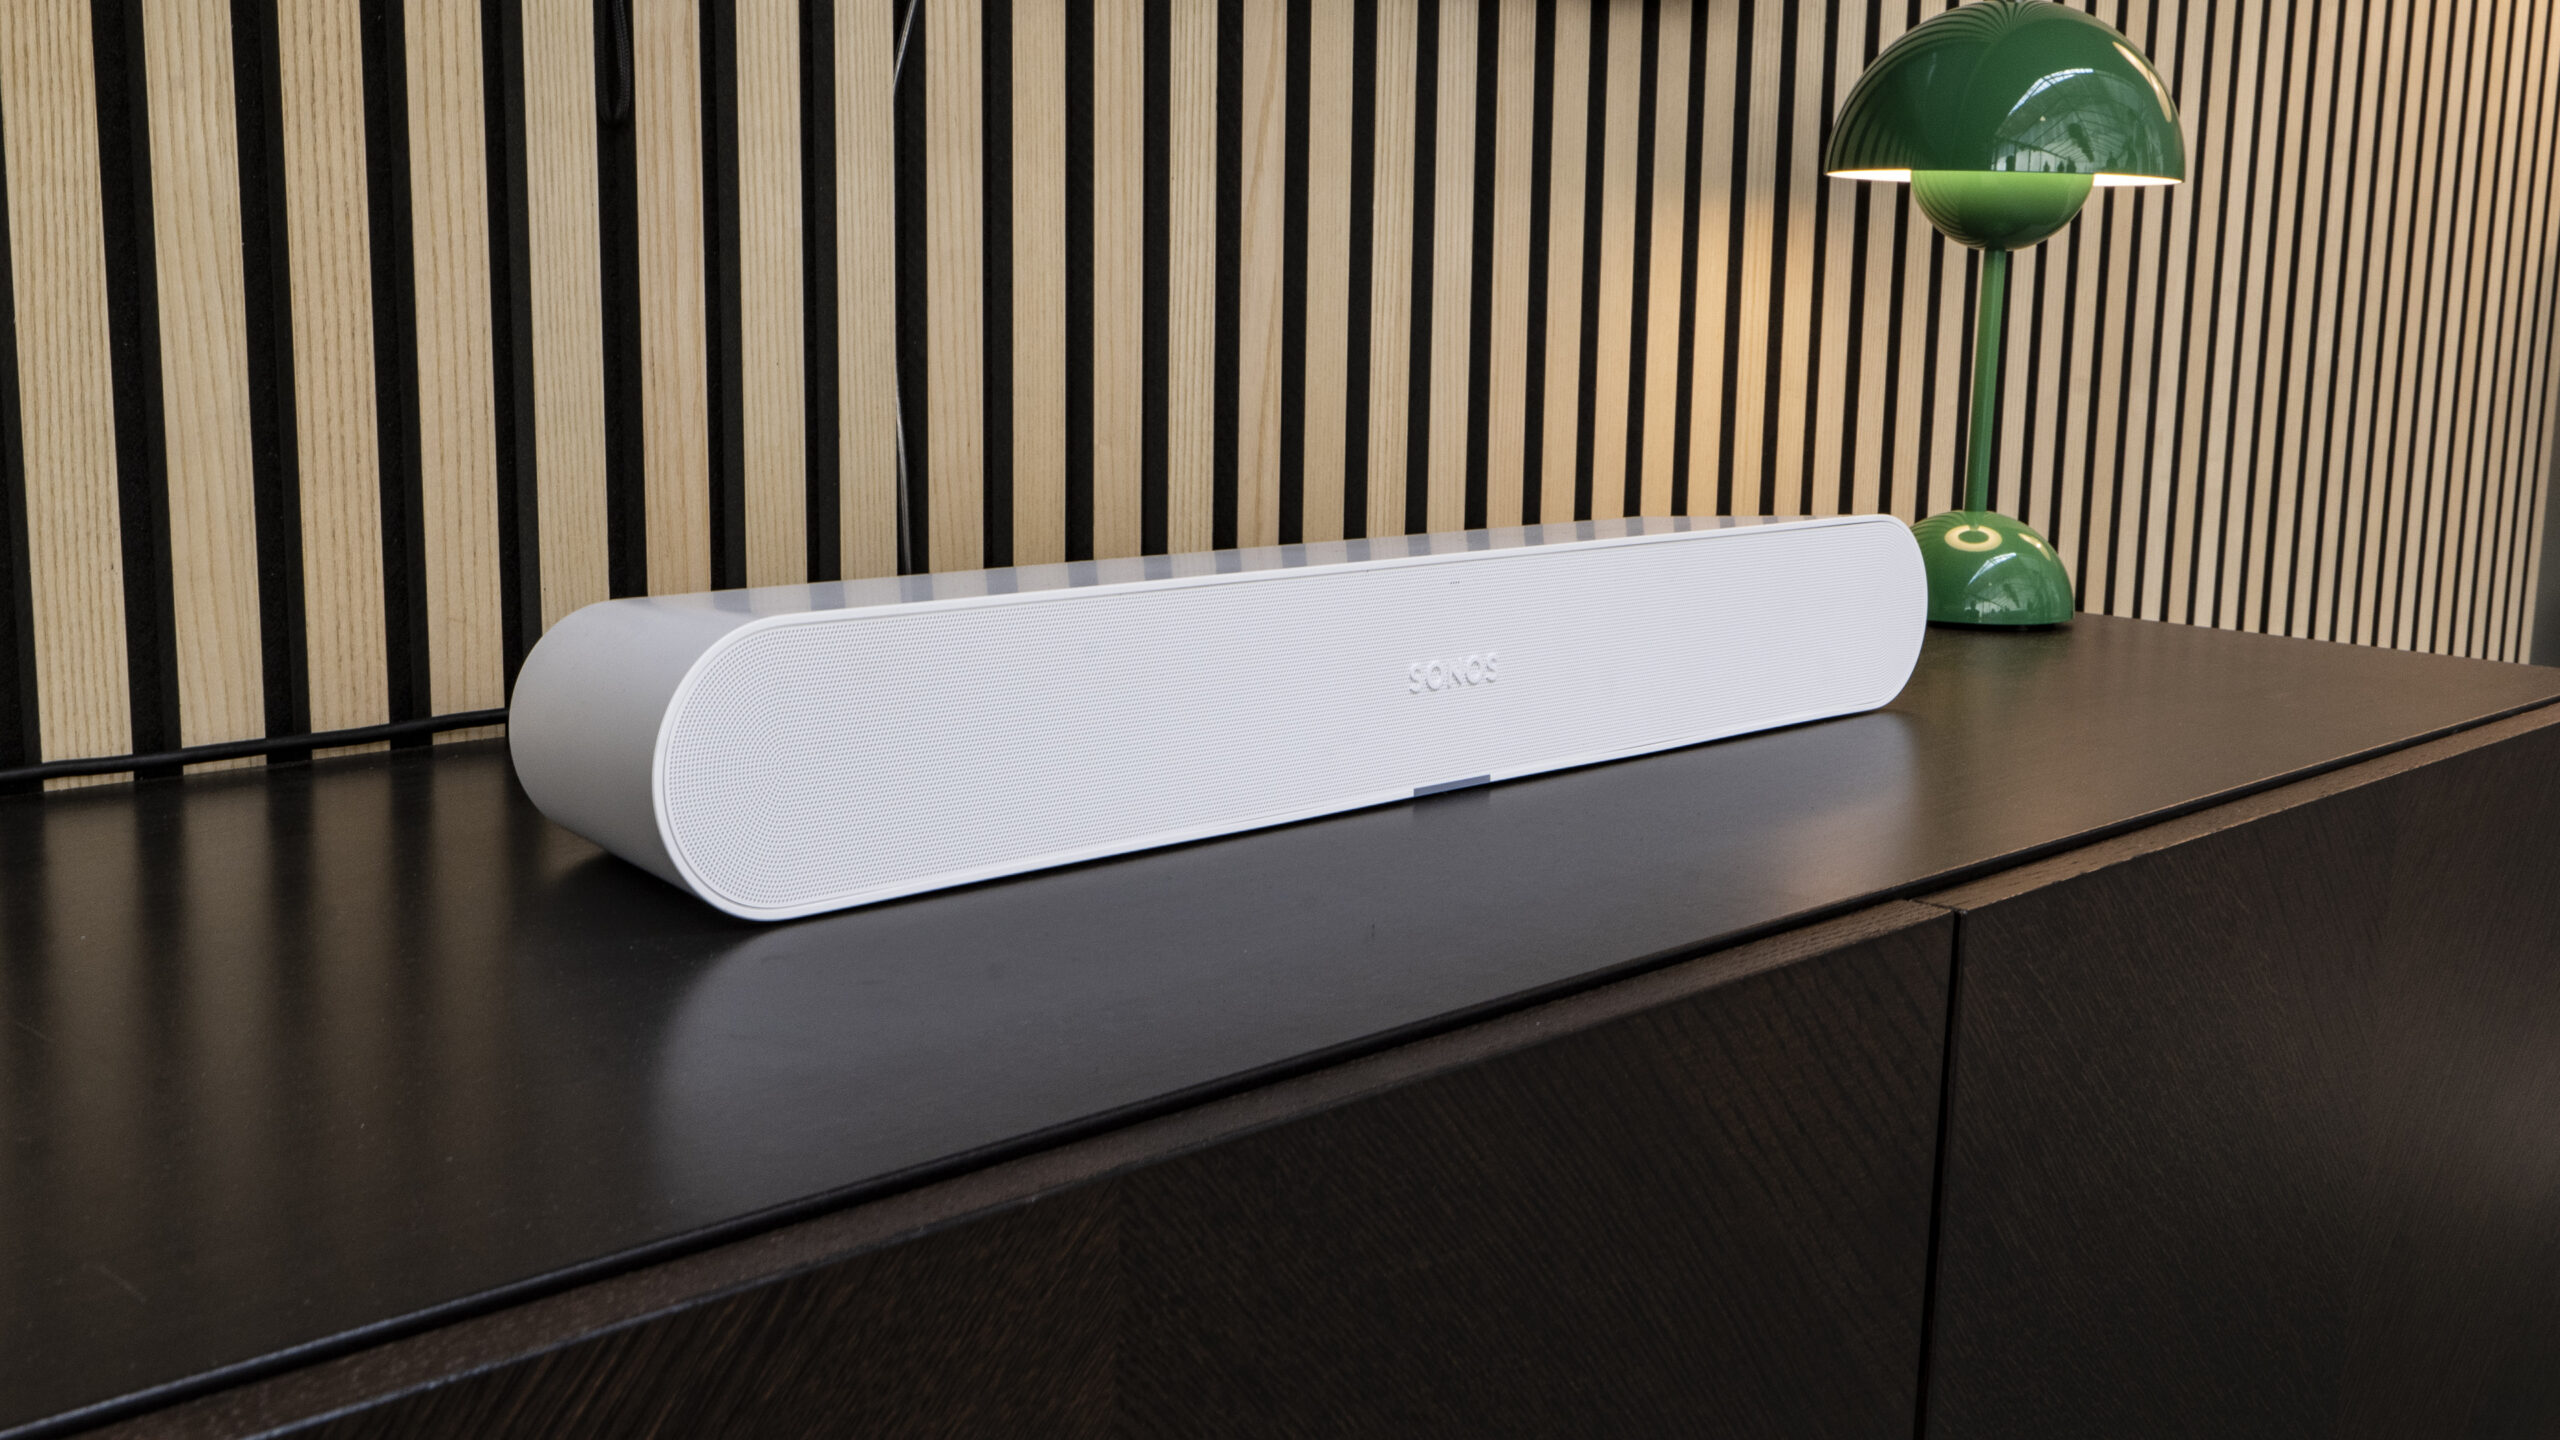 Sonos Ray Photo Geir Nordby scaled 1